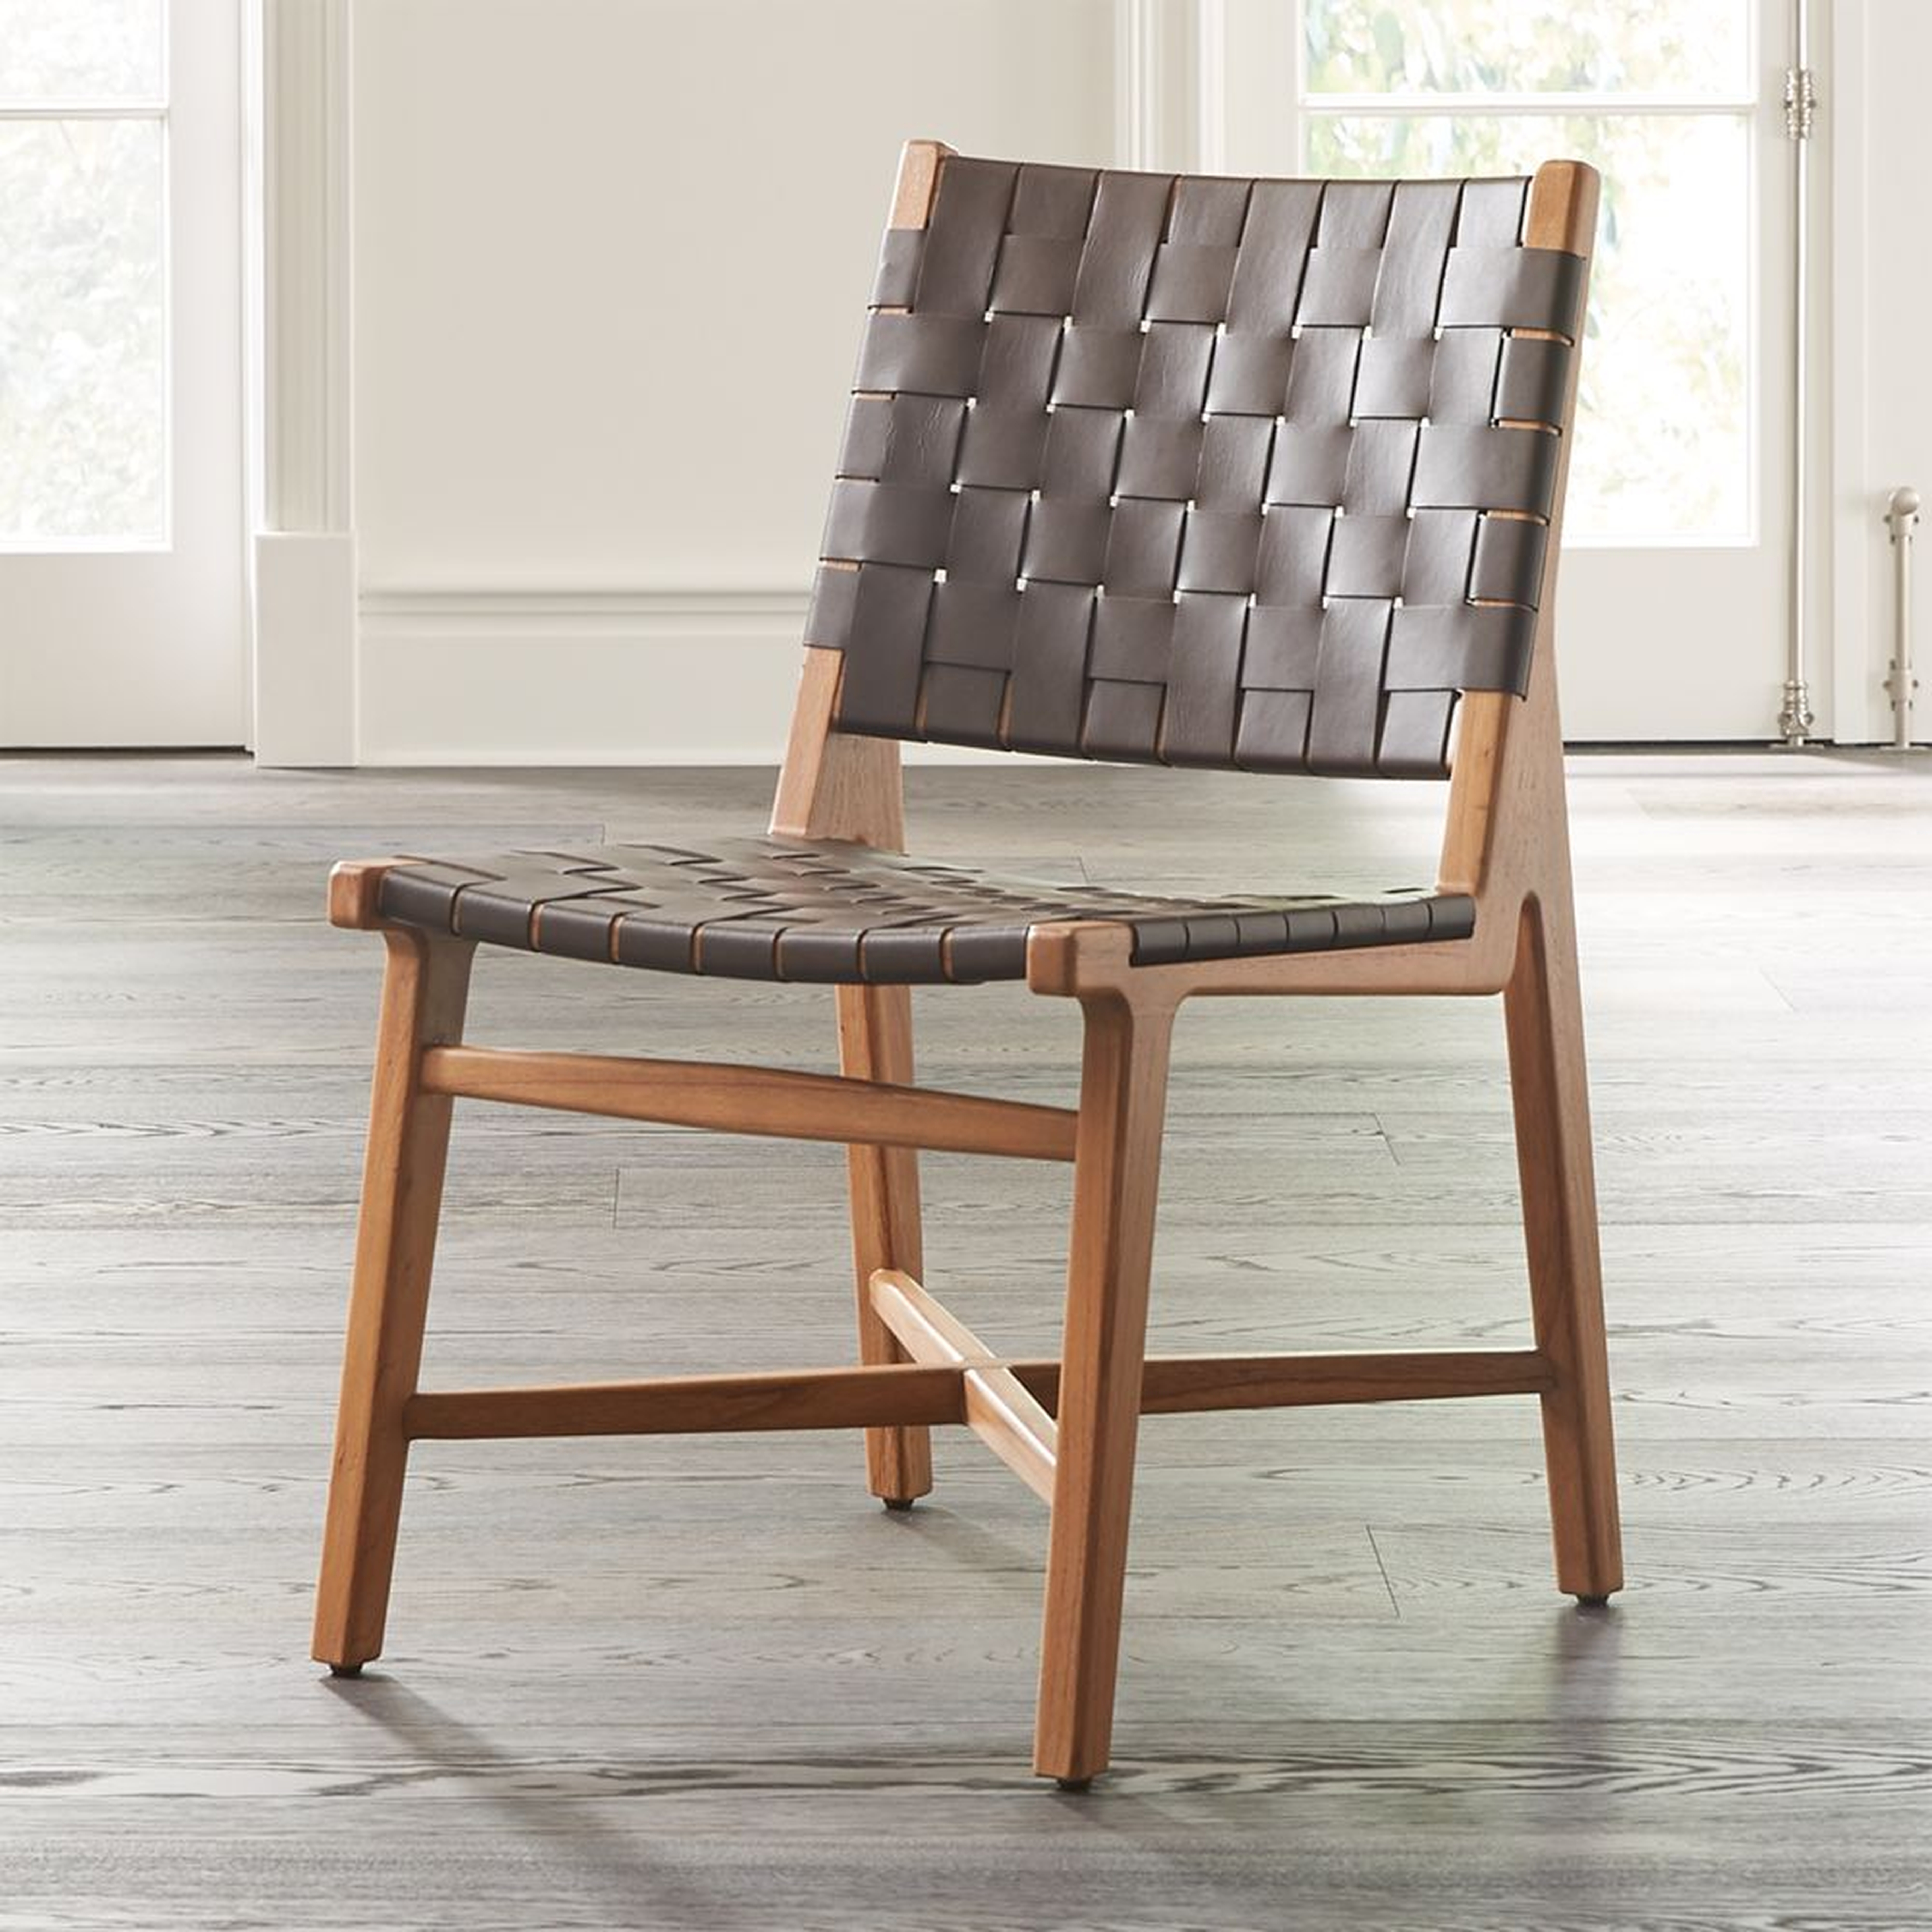 Taj Brown Woven Leather Dining Chair - Crate and Barrel